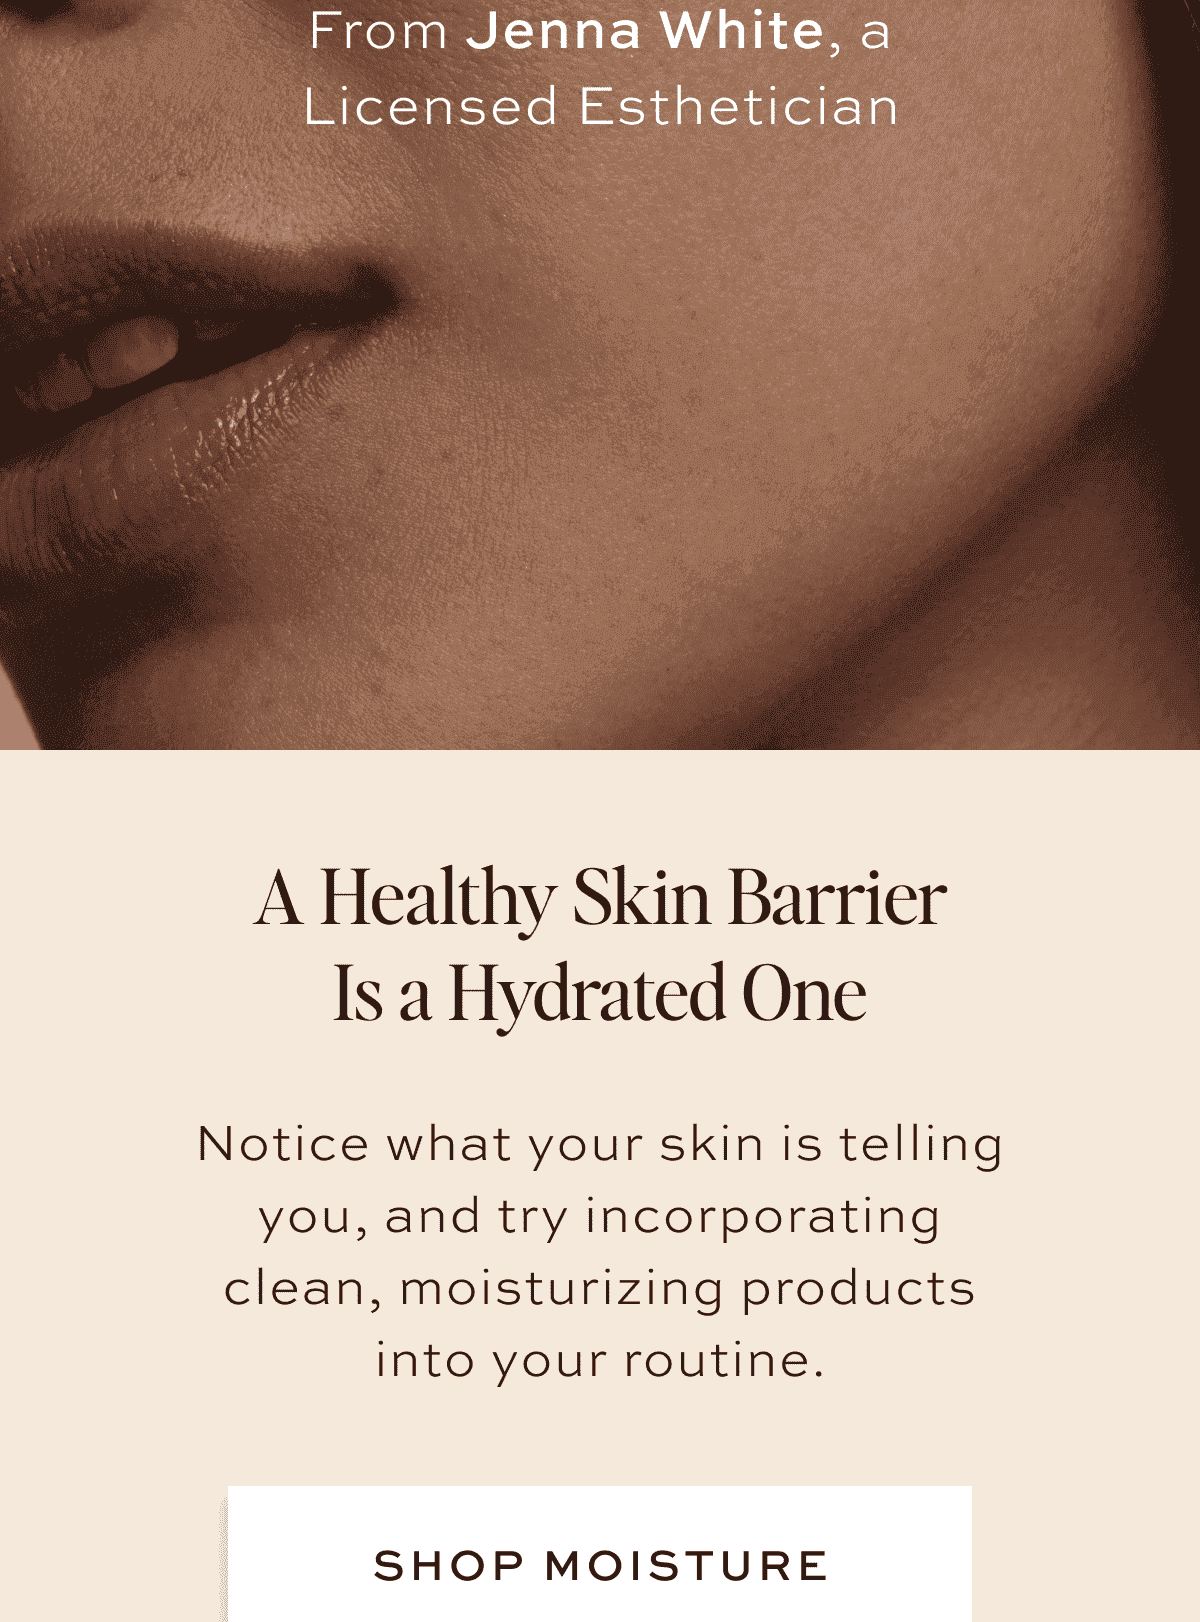 Why your skin is dry: Your skin barrier, the outermost layer of the skin that manages hydration and protects from pollutants, is likely impaired.